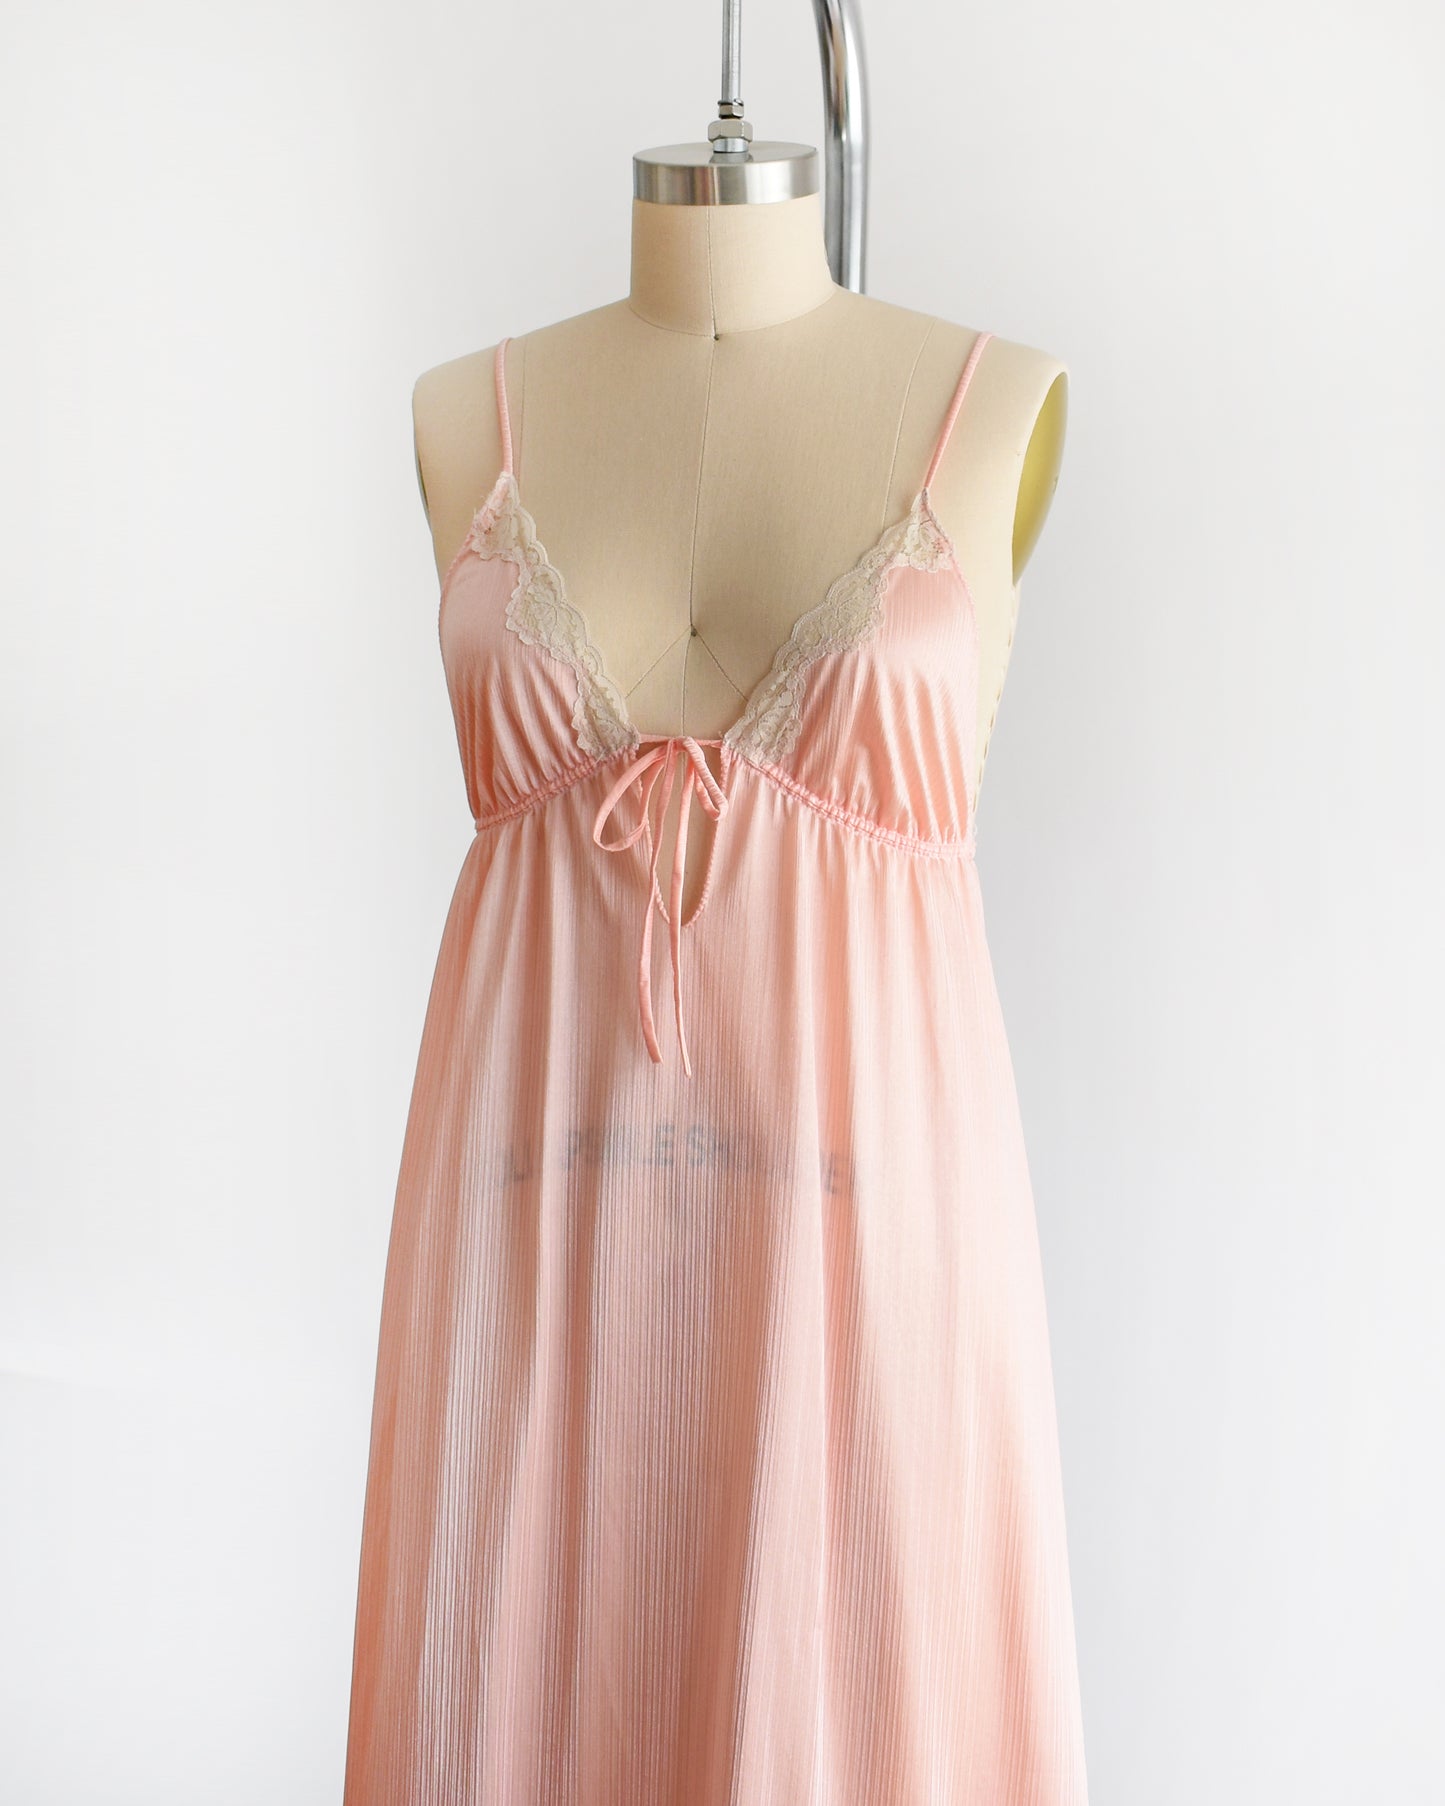 Side front view of a vintage 1970s peachy pink nightgown that has lace trim on the bodice